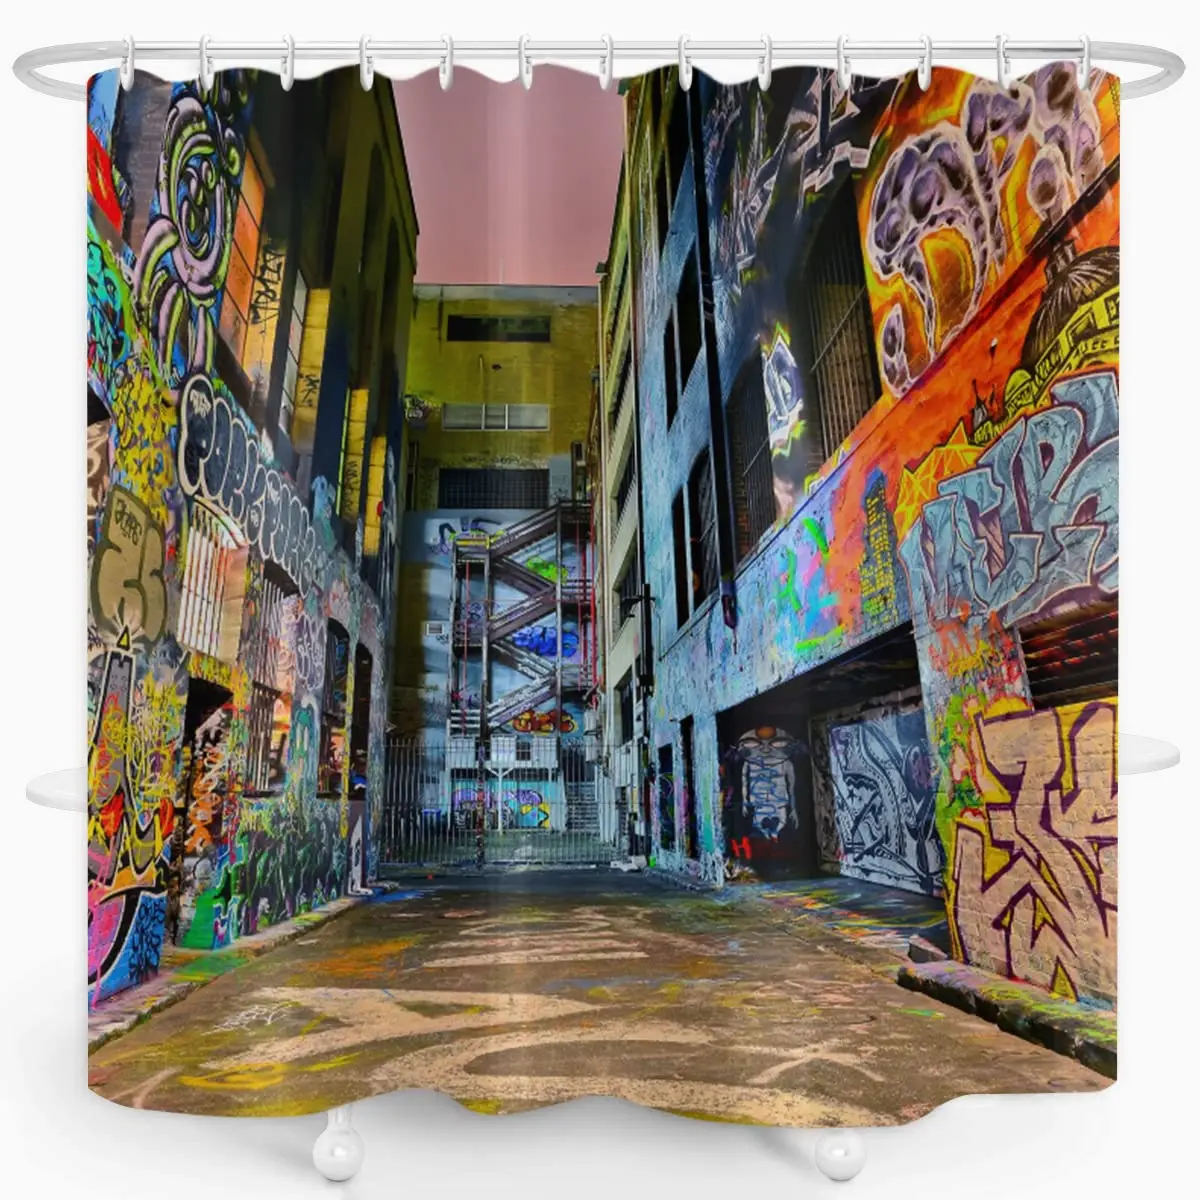 

Shower Curtain Colorful Graffiti Abstract Art Street Style Bathroom Curtains Decor Polyester Fabric Waterproof Set with Hooks